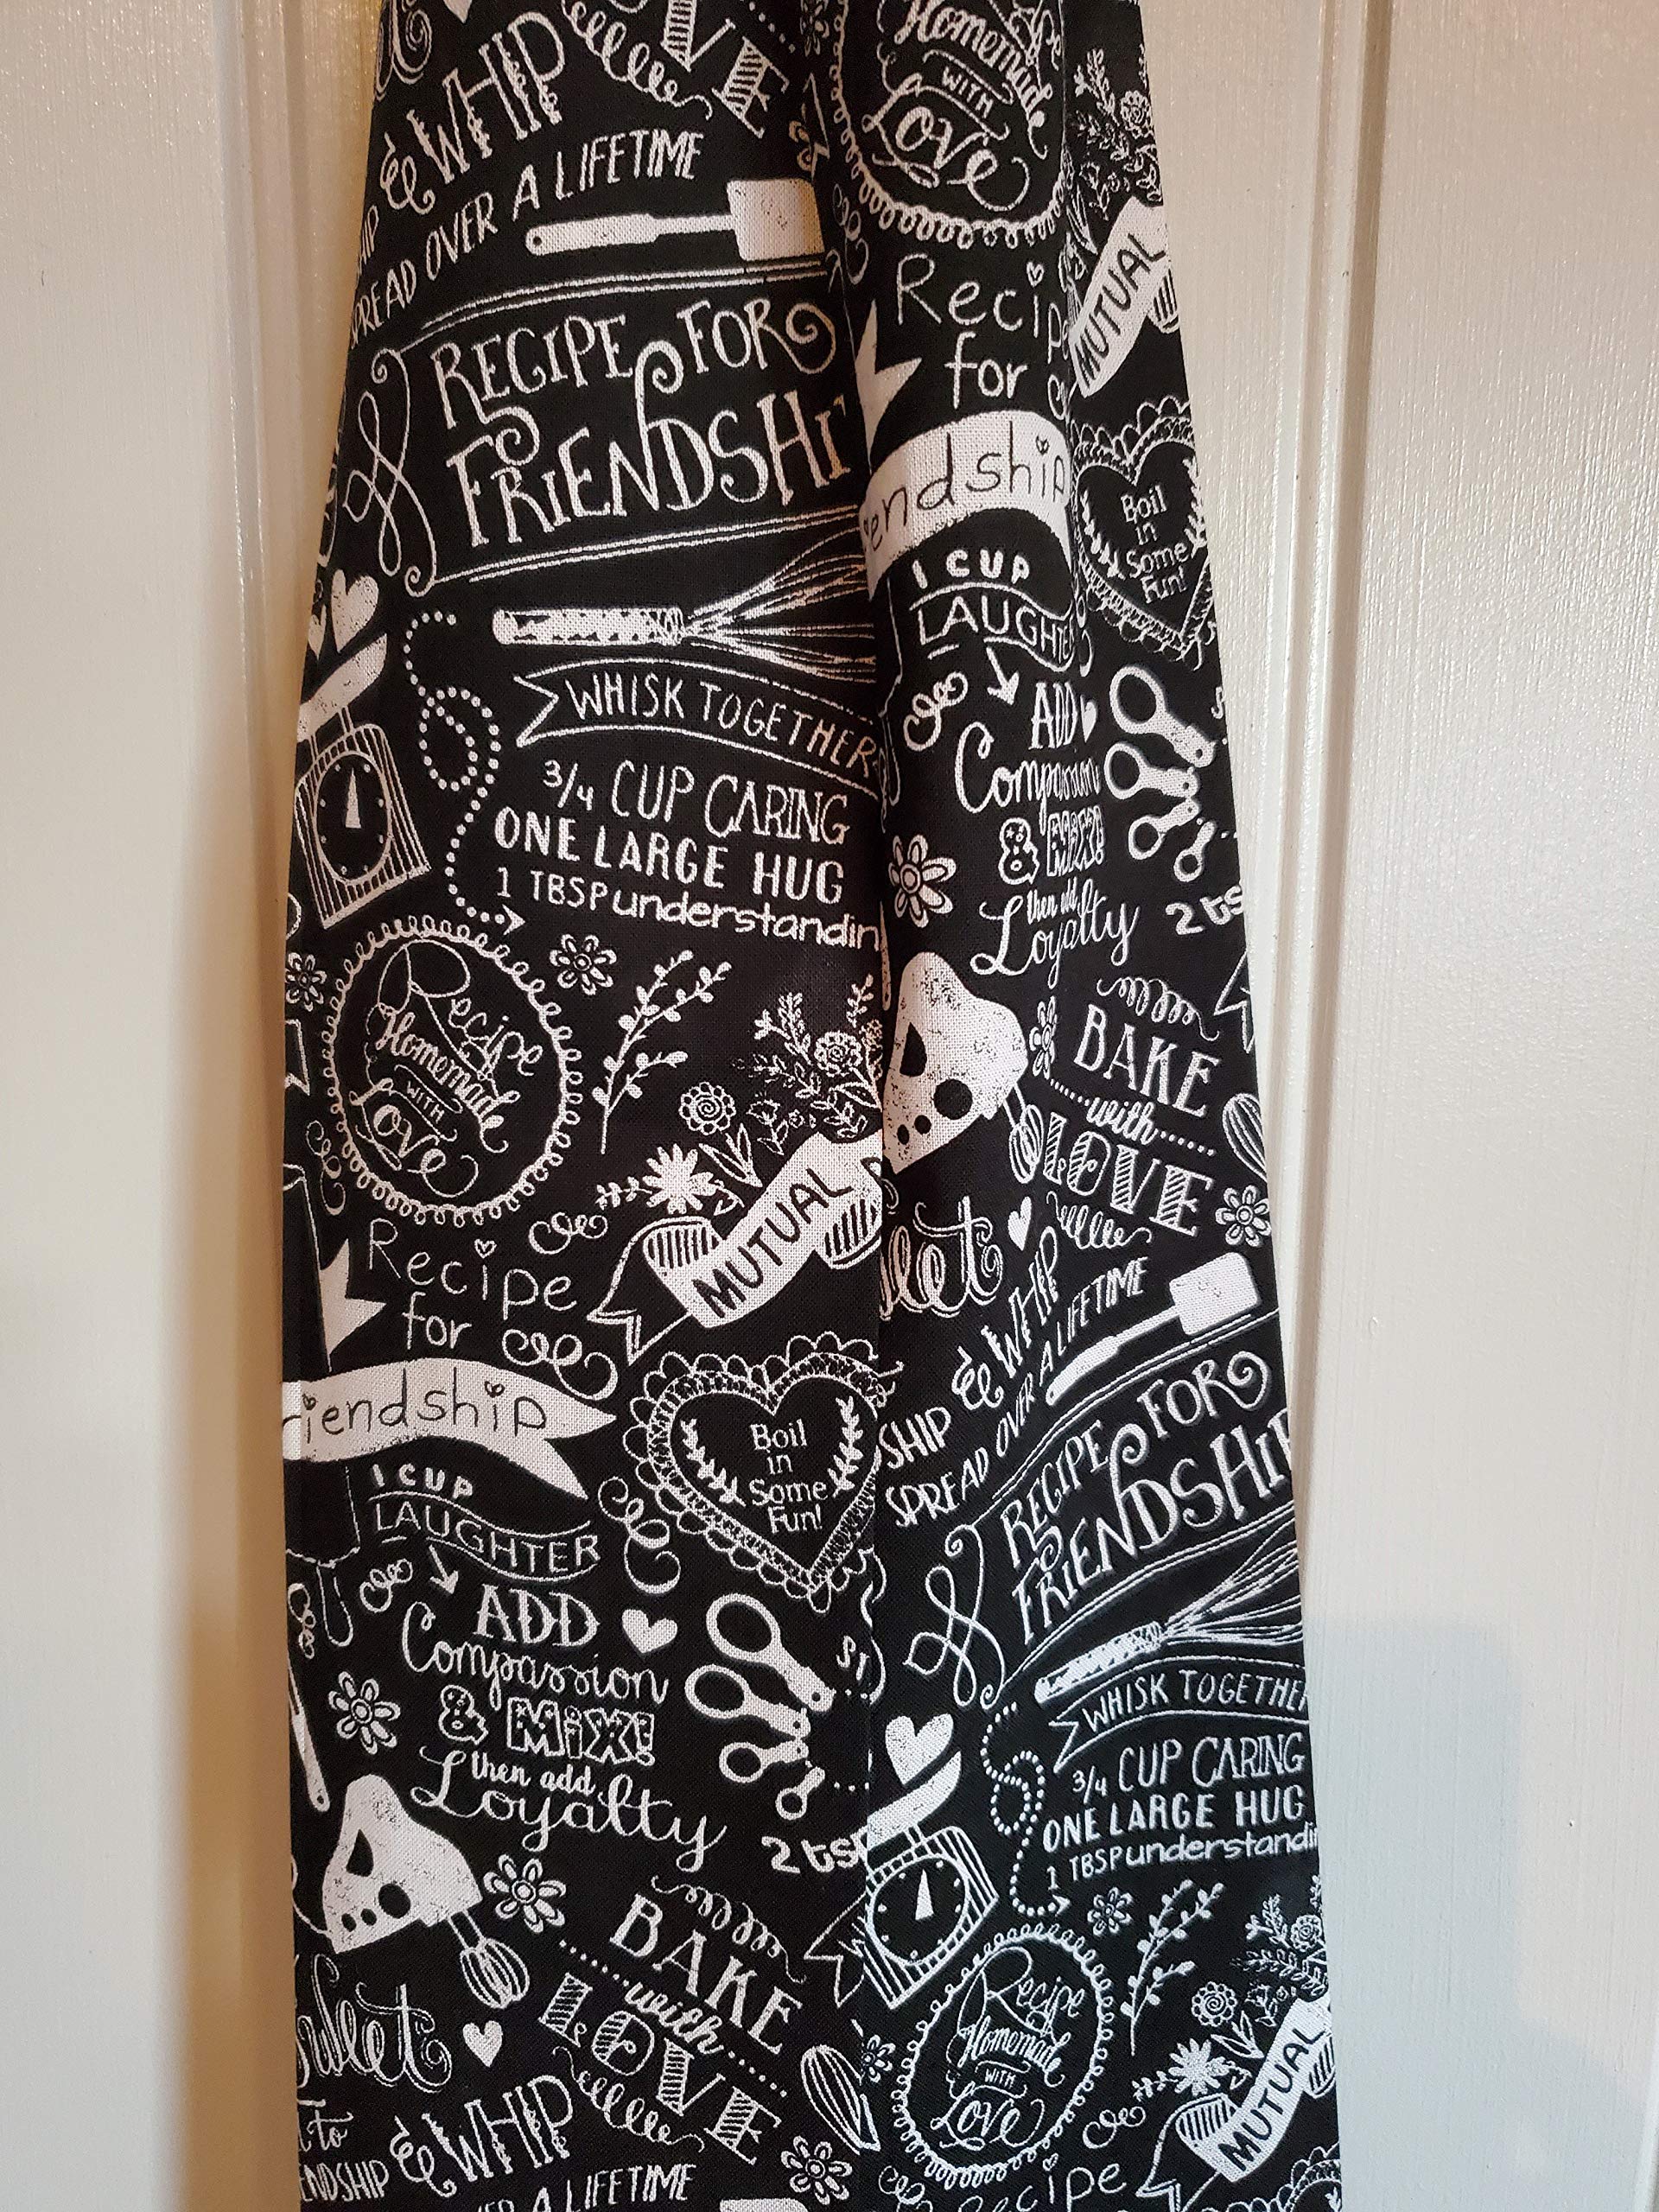 Friendship Kitchen Boa, Neck Apron, Kitchen Neck Scarf, Neck Towel, Kitchen Scarf, Baker’s Boa, Chef’s Towel, Cooking Towel, Grilling Towel, Gifts under $25